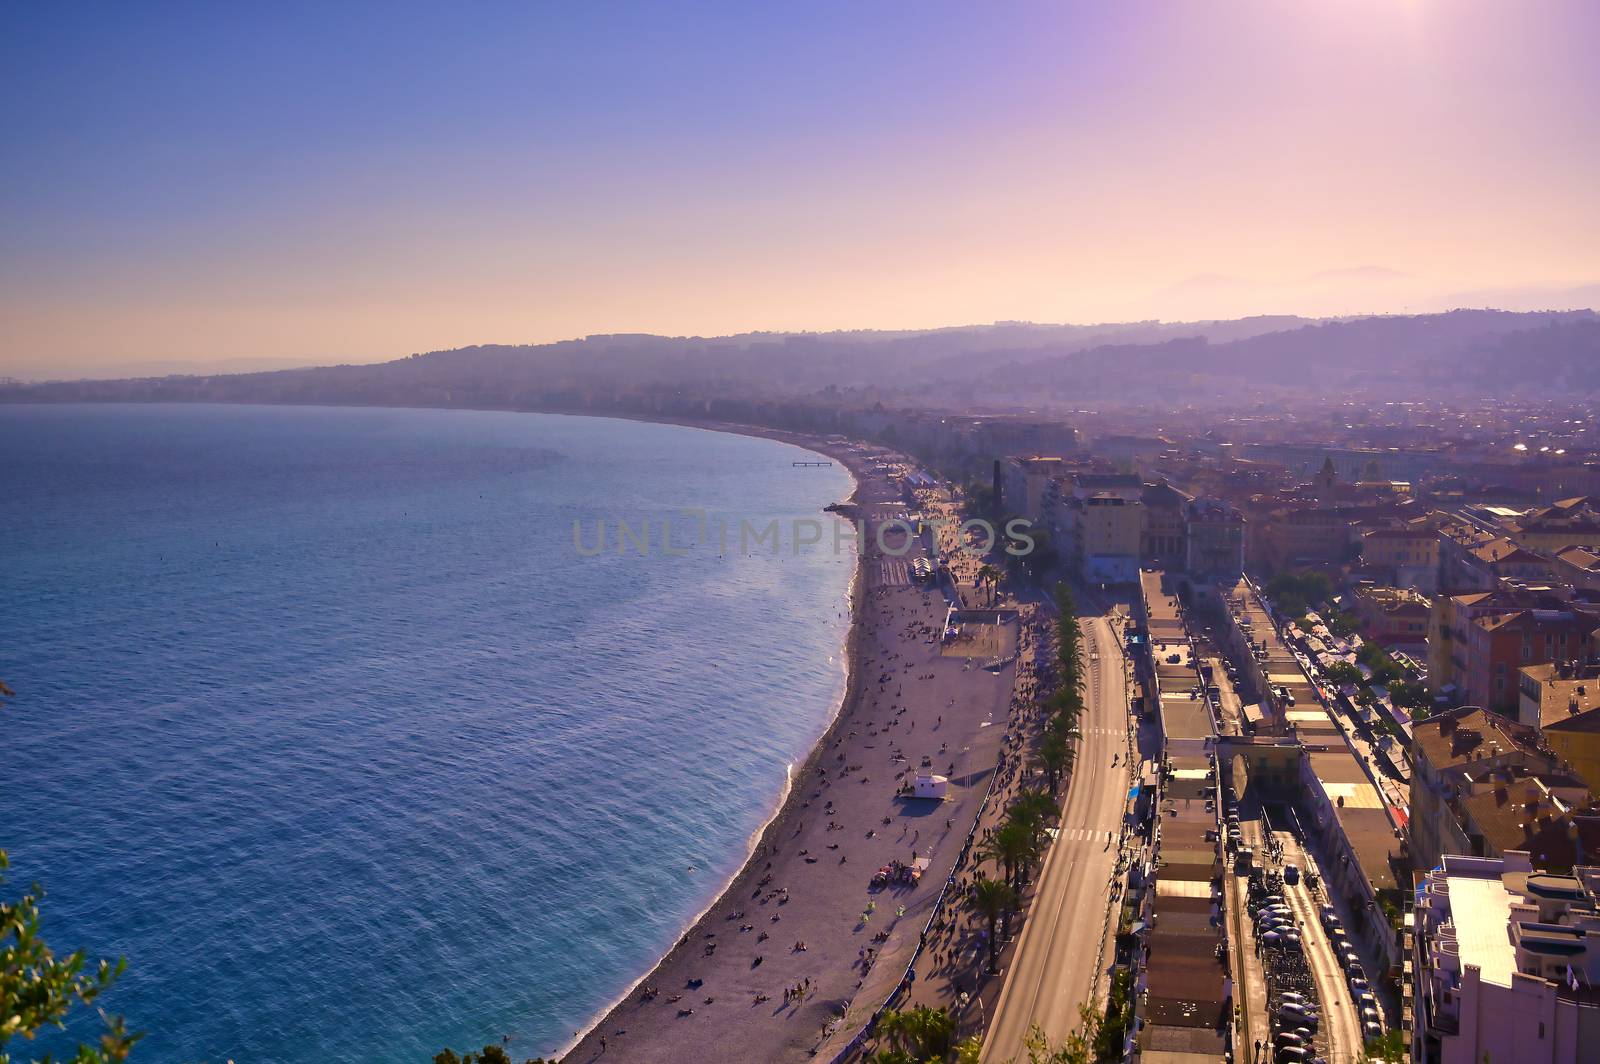 The Promenade des Anglais in Nice, France by jbyard22